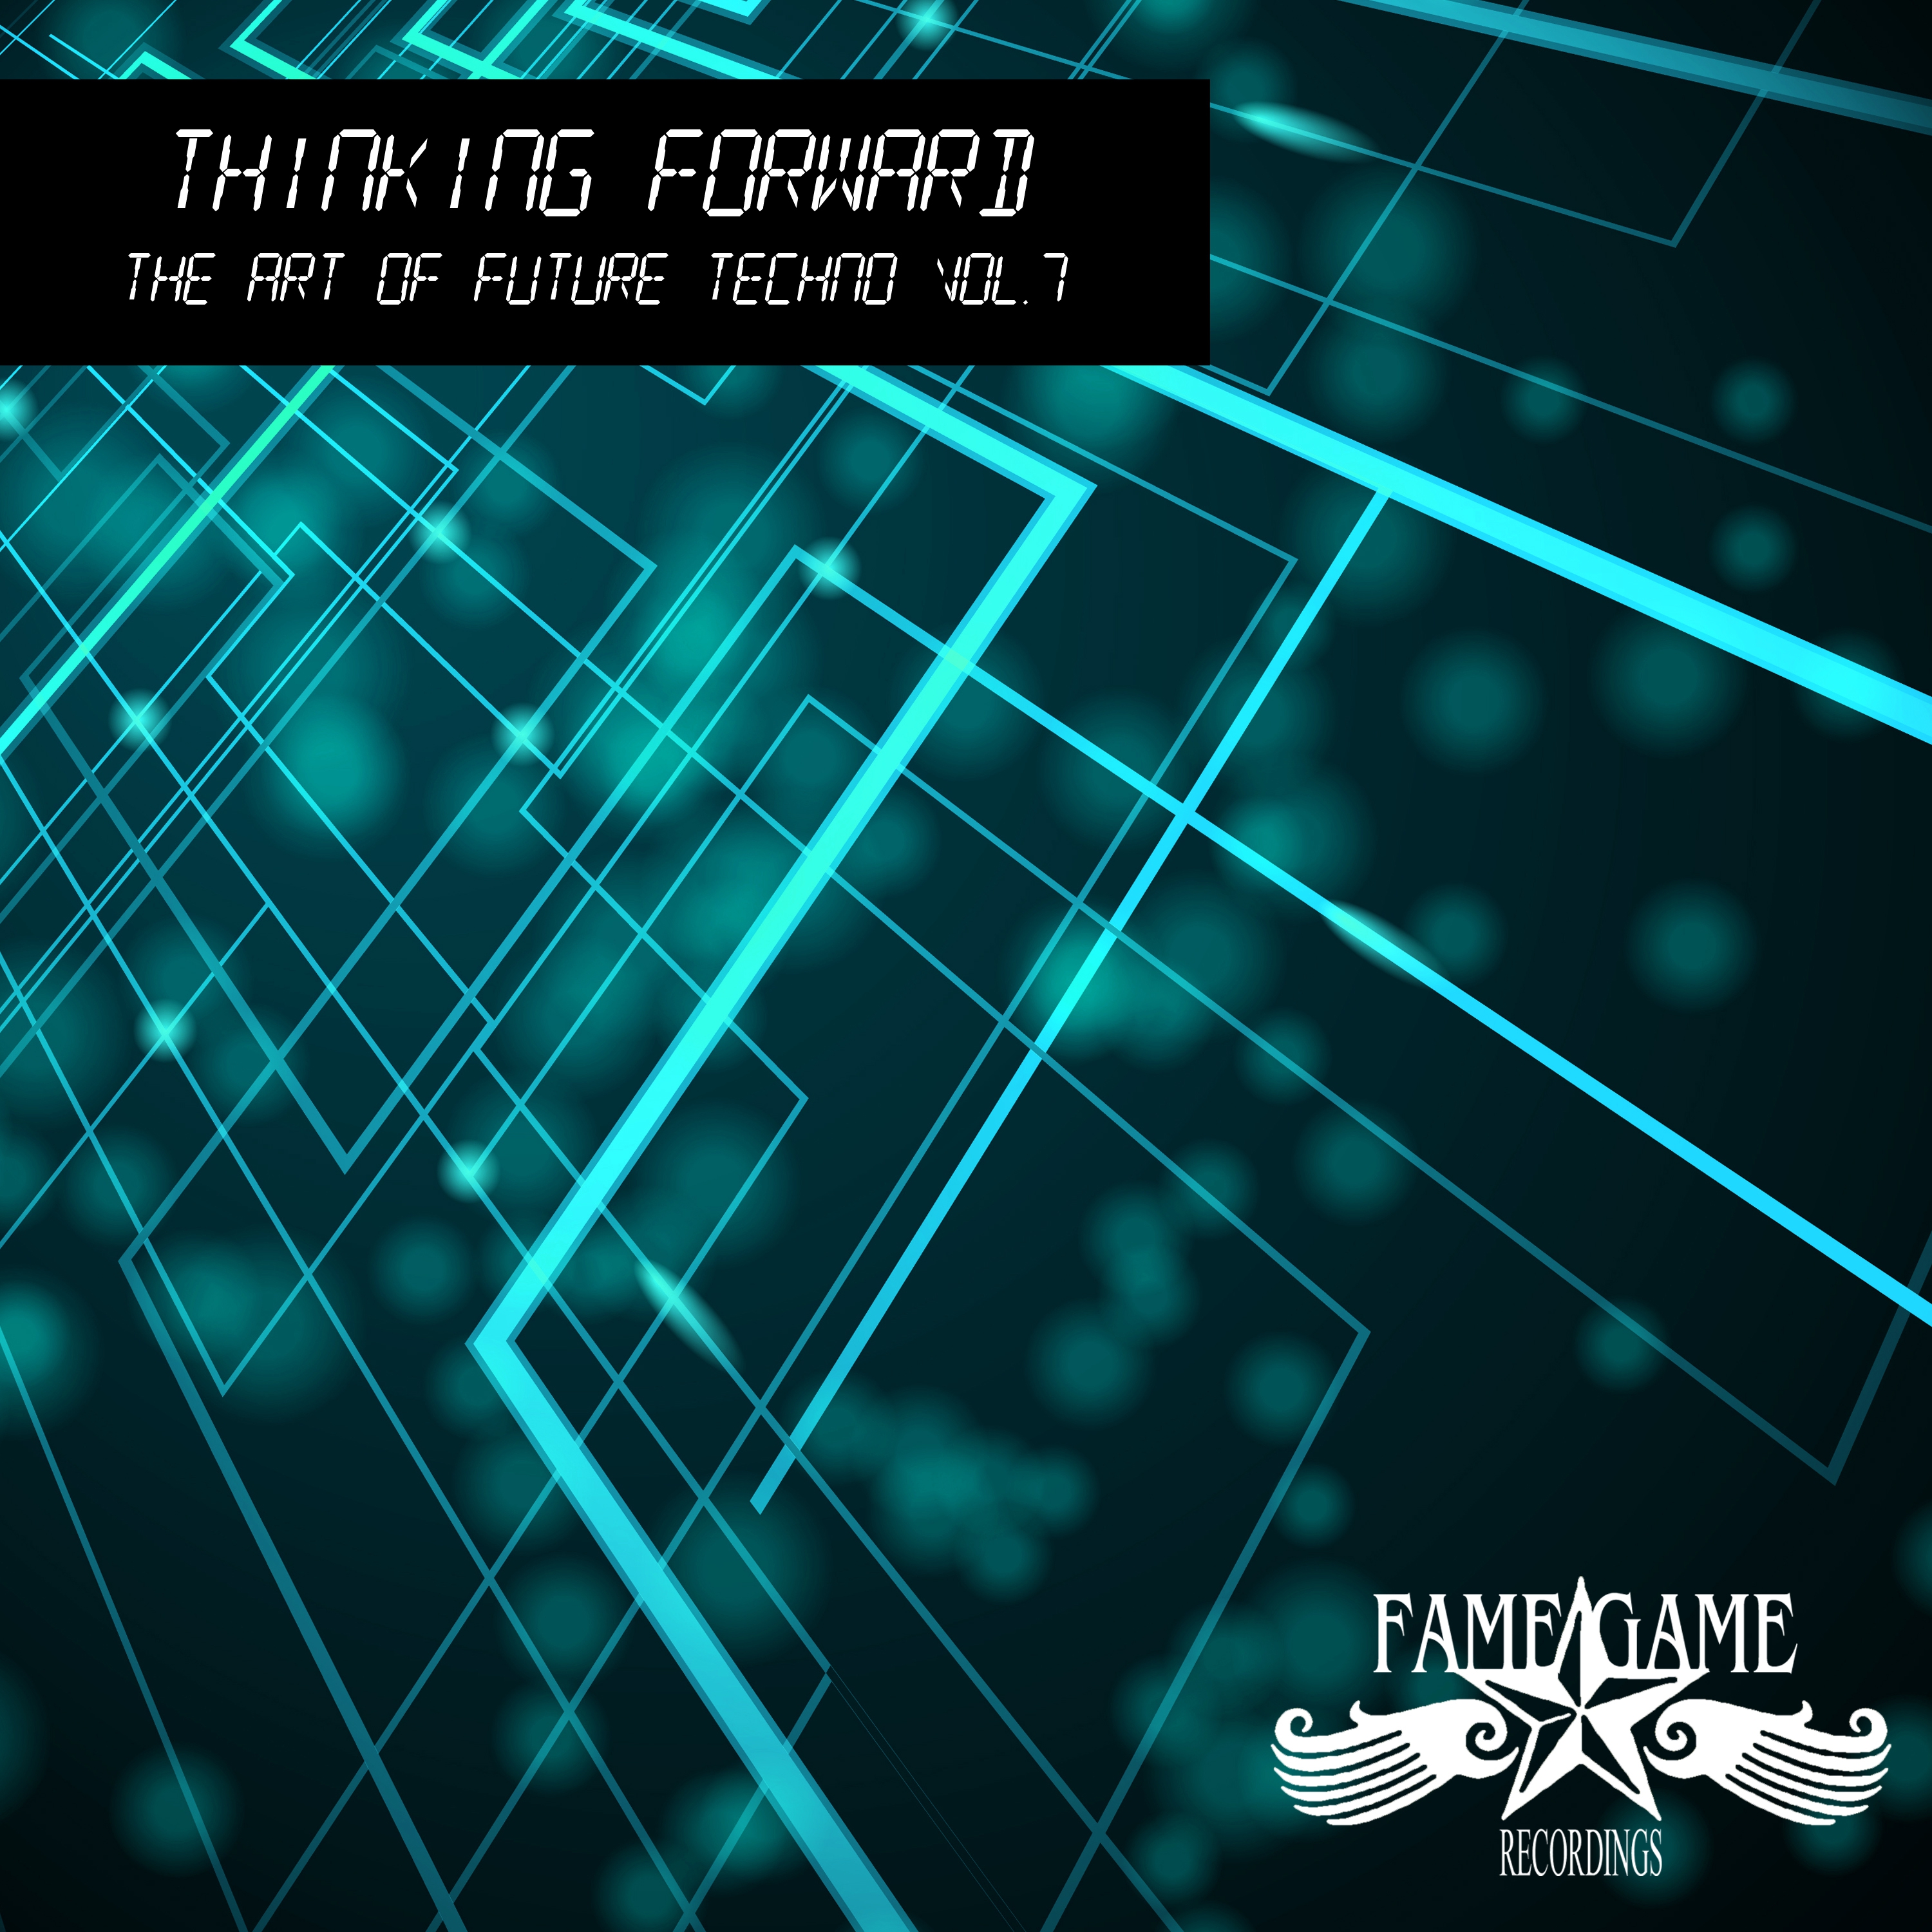 Thinking Forward - State of the Art Techno, Vol. 7